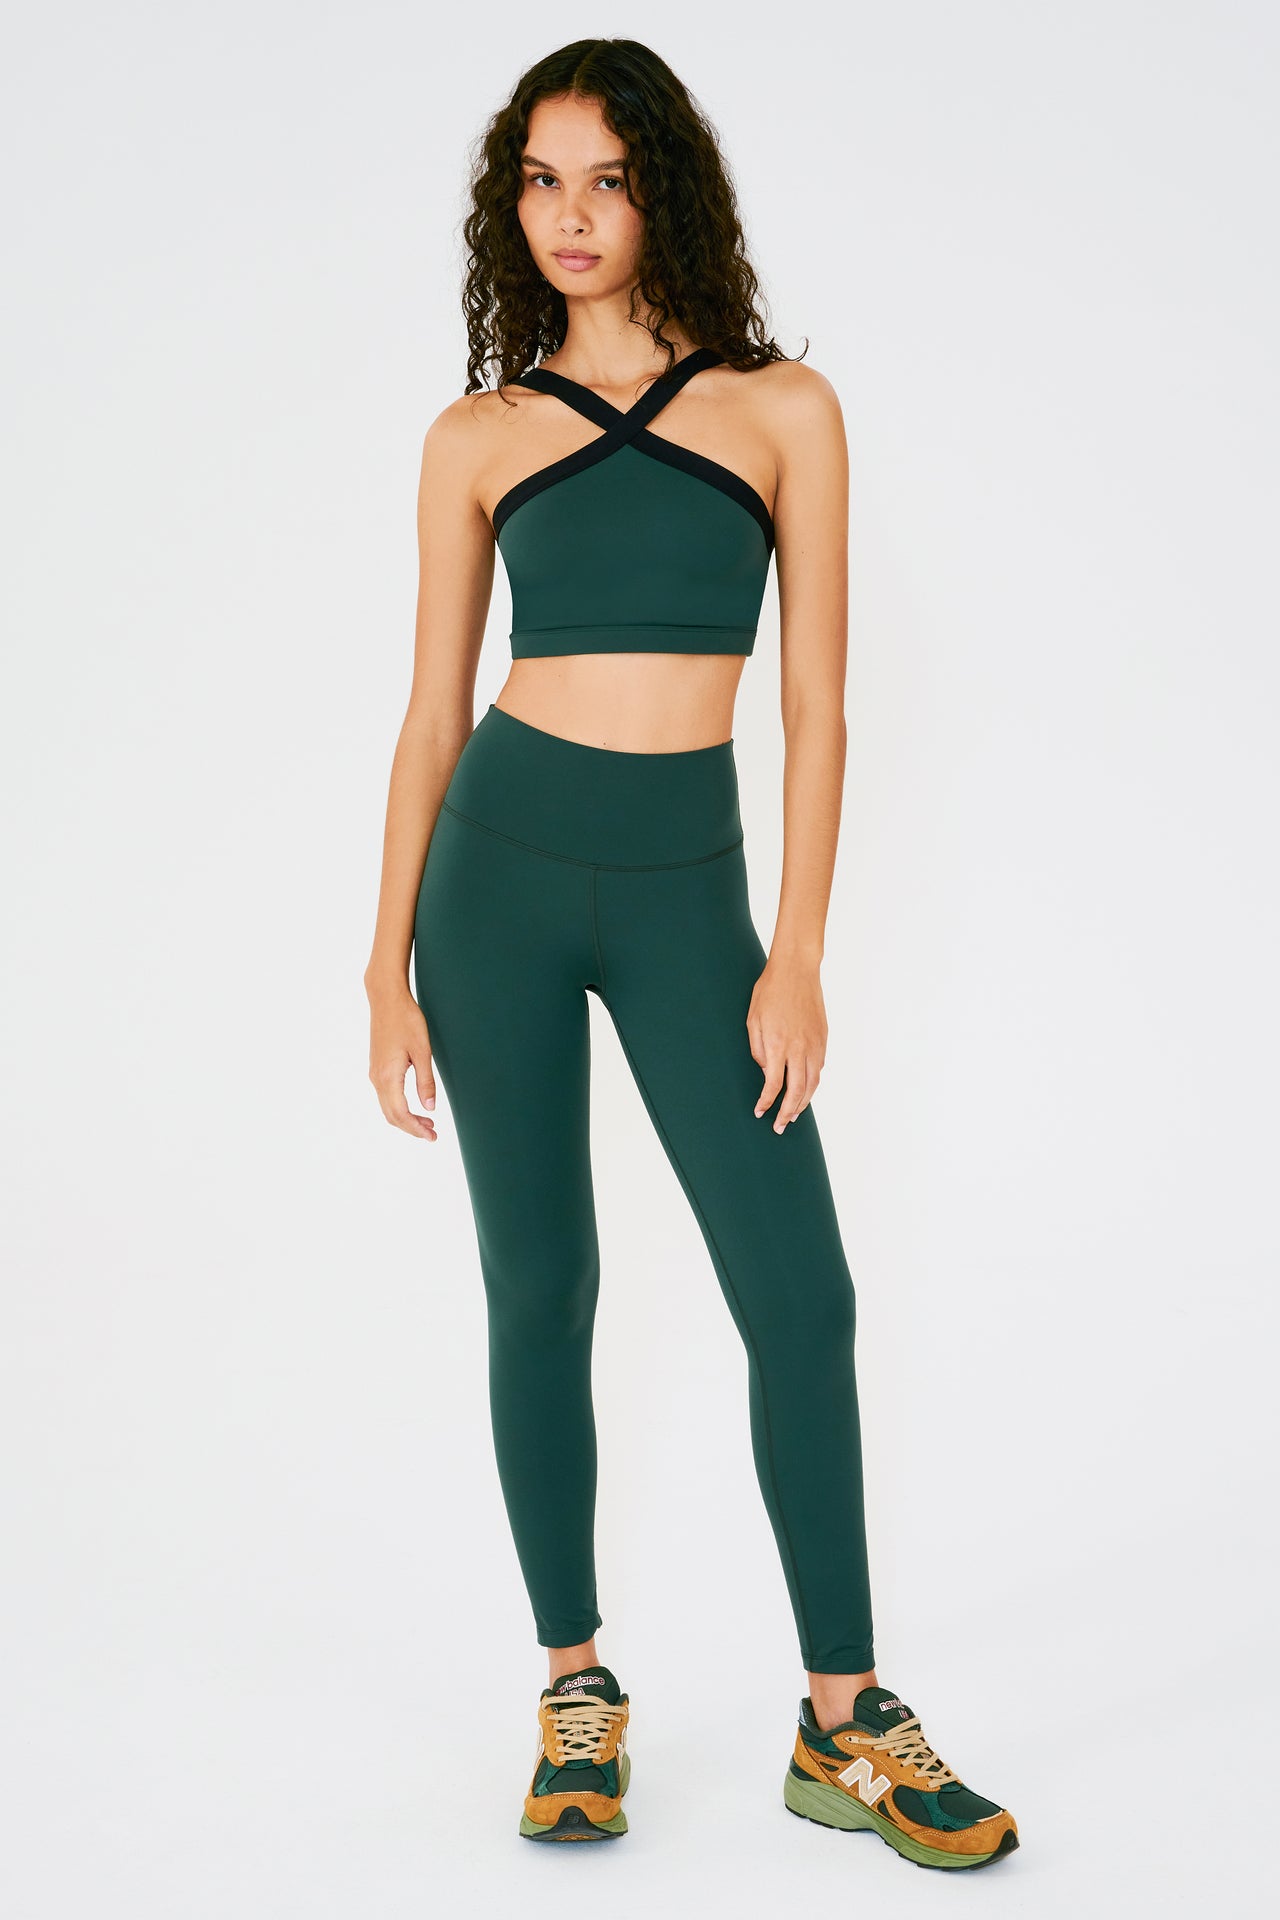 Front full view of woman with dark curly hair wearing dark green high waist  leggings and dark green bra with black crossed straps paired with dark green and orange shoes